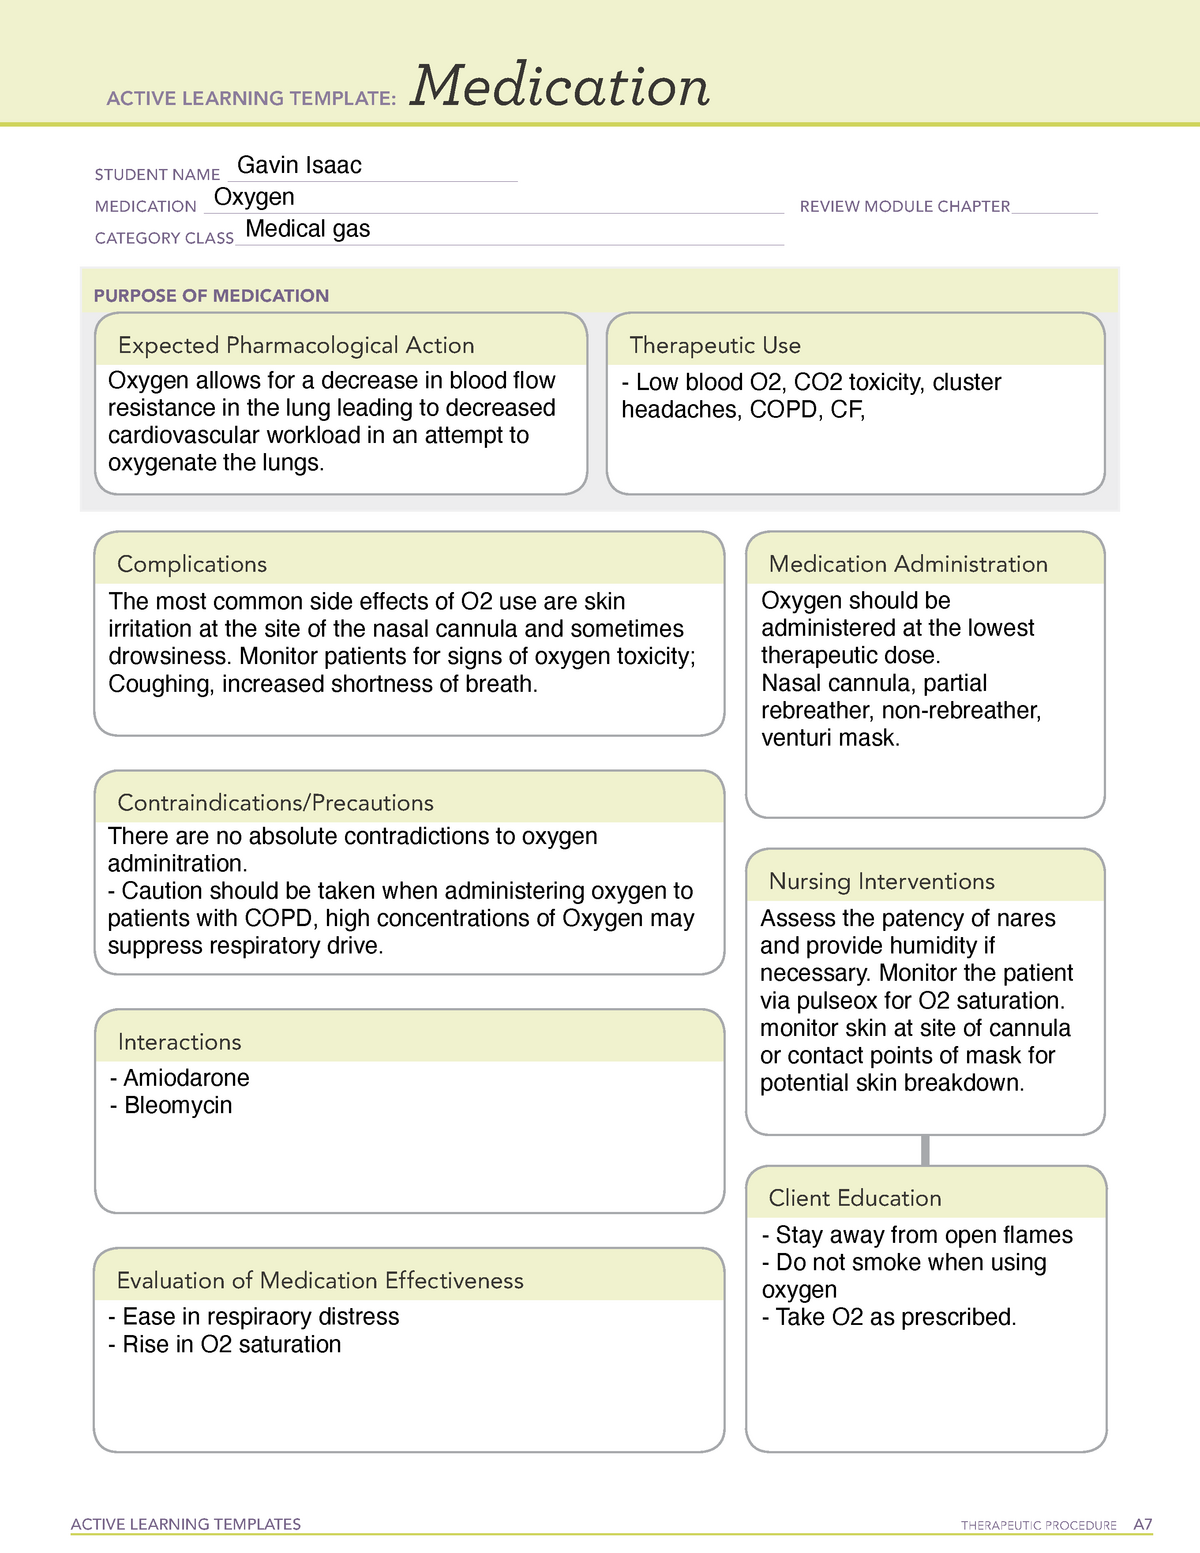 Med Oxygen Active Learning Template ACTIVE LEARNING TEMPLATES